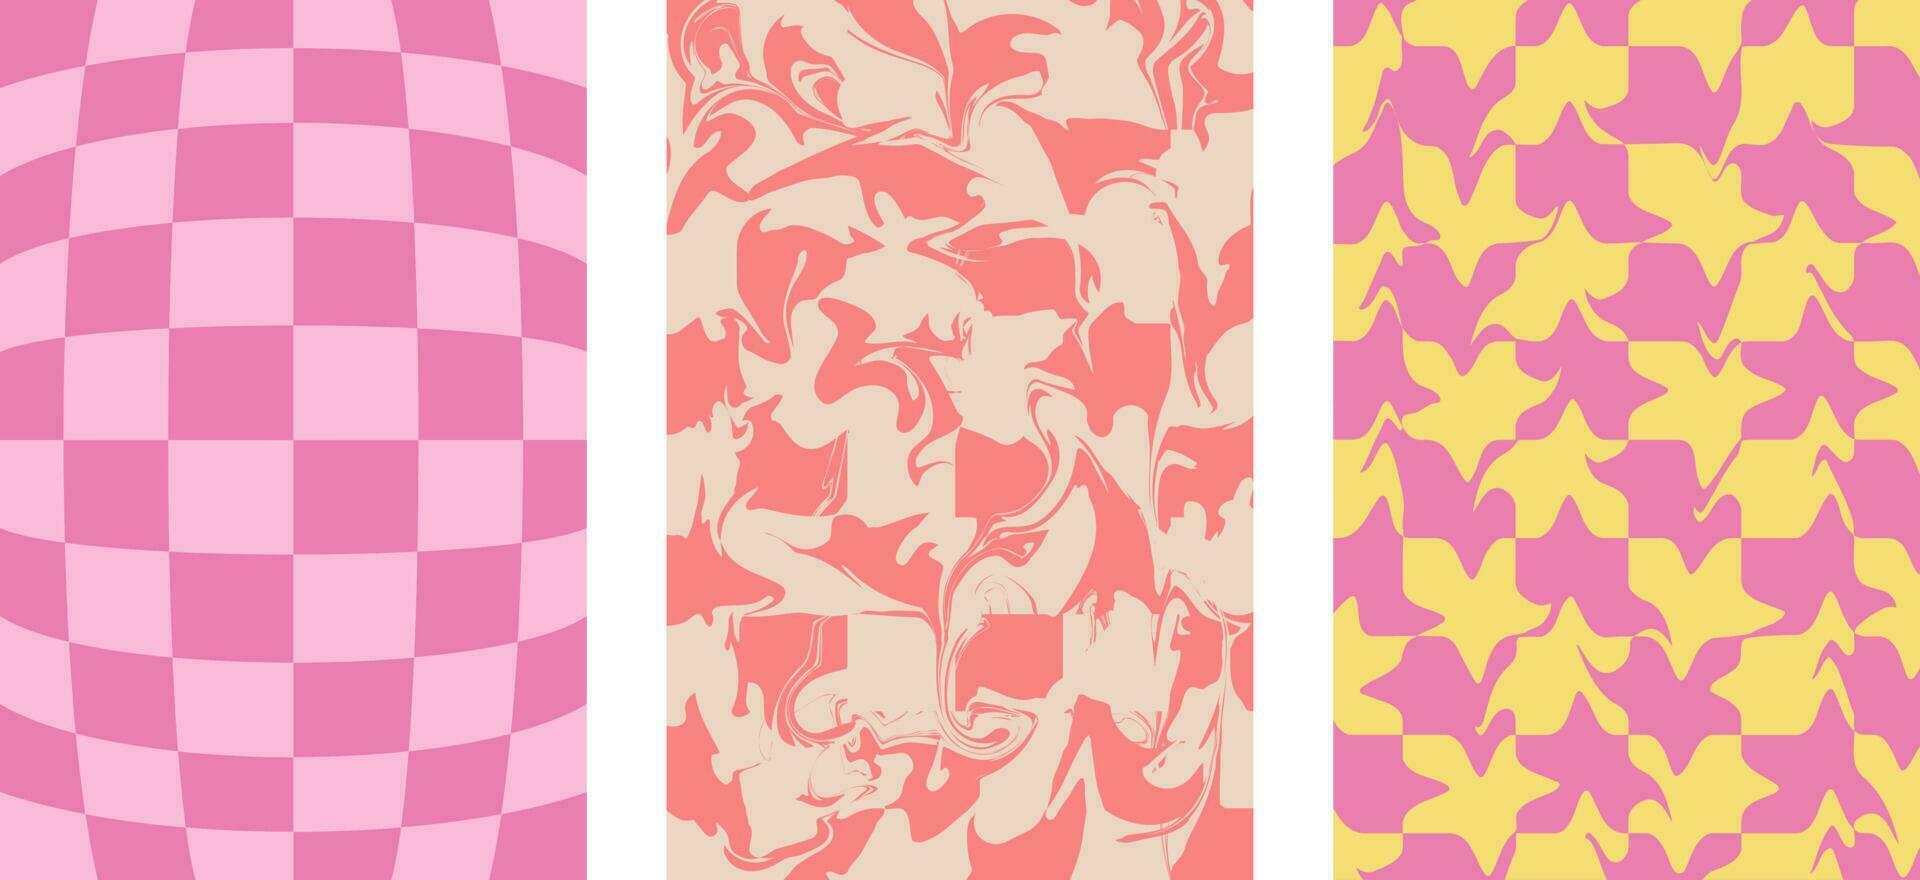 Set of Backgrounds Retro Groovy Abstract Psychedelic Check Y2K 90s. Phone case, Background, print, banner, repeating pattern, vector. vector